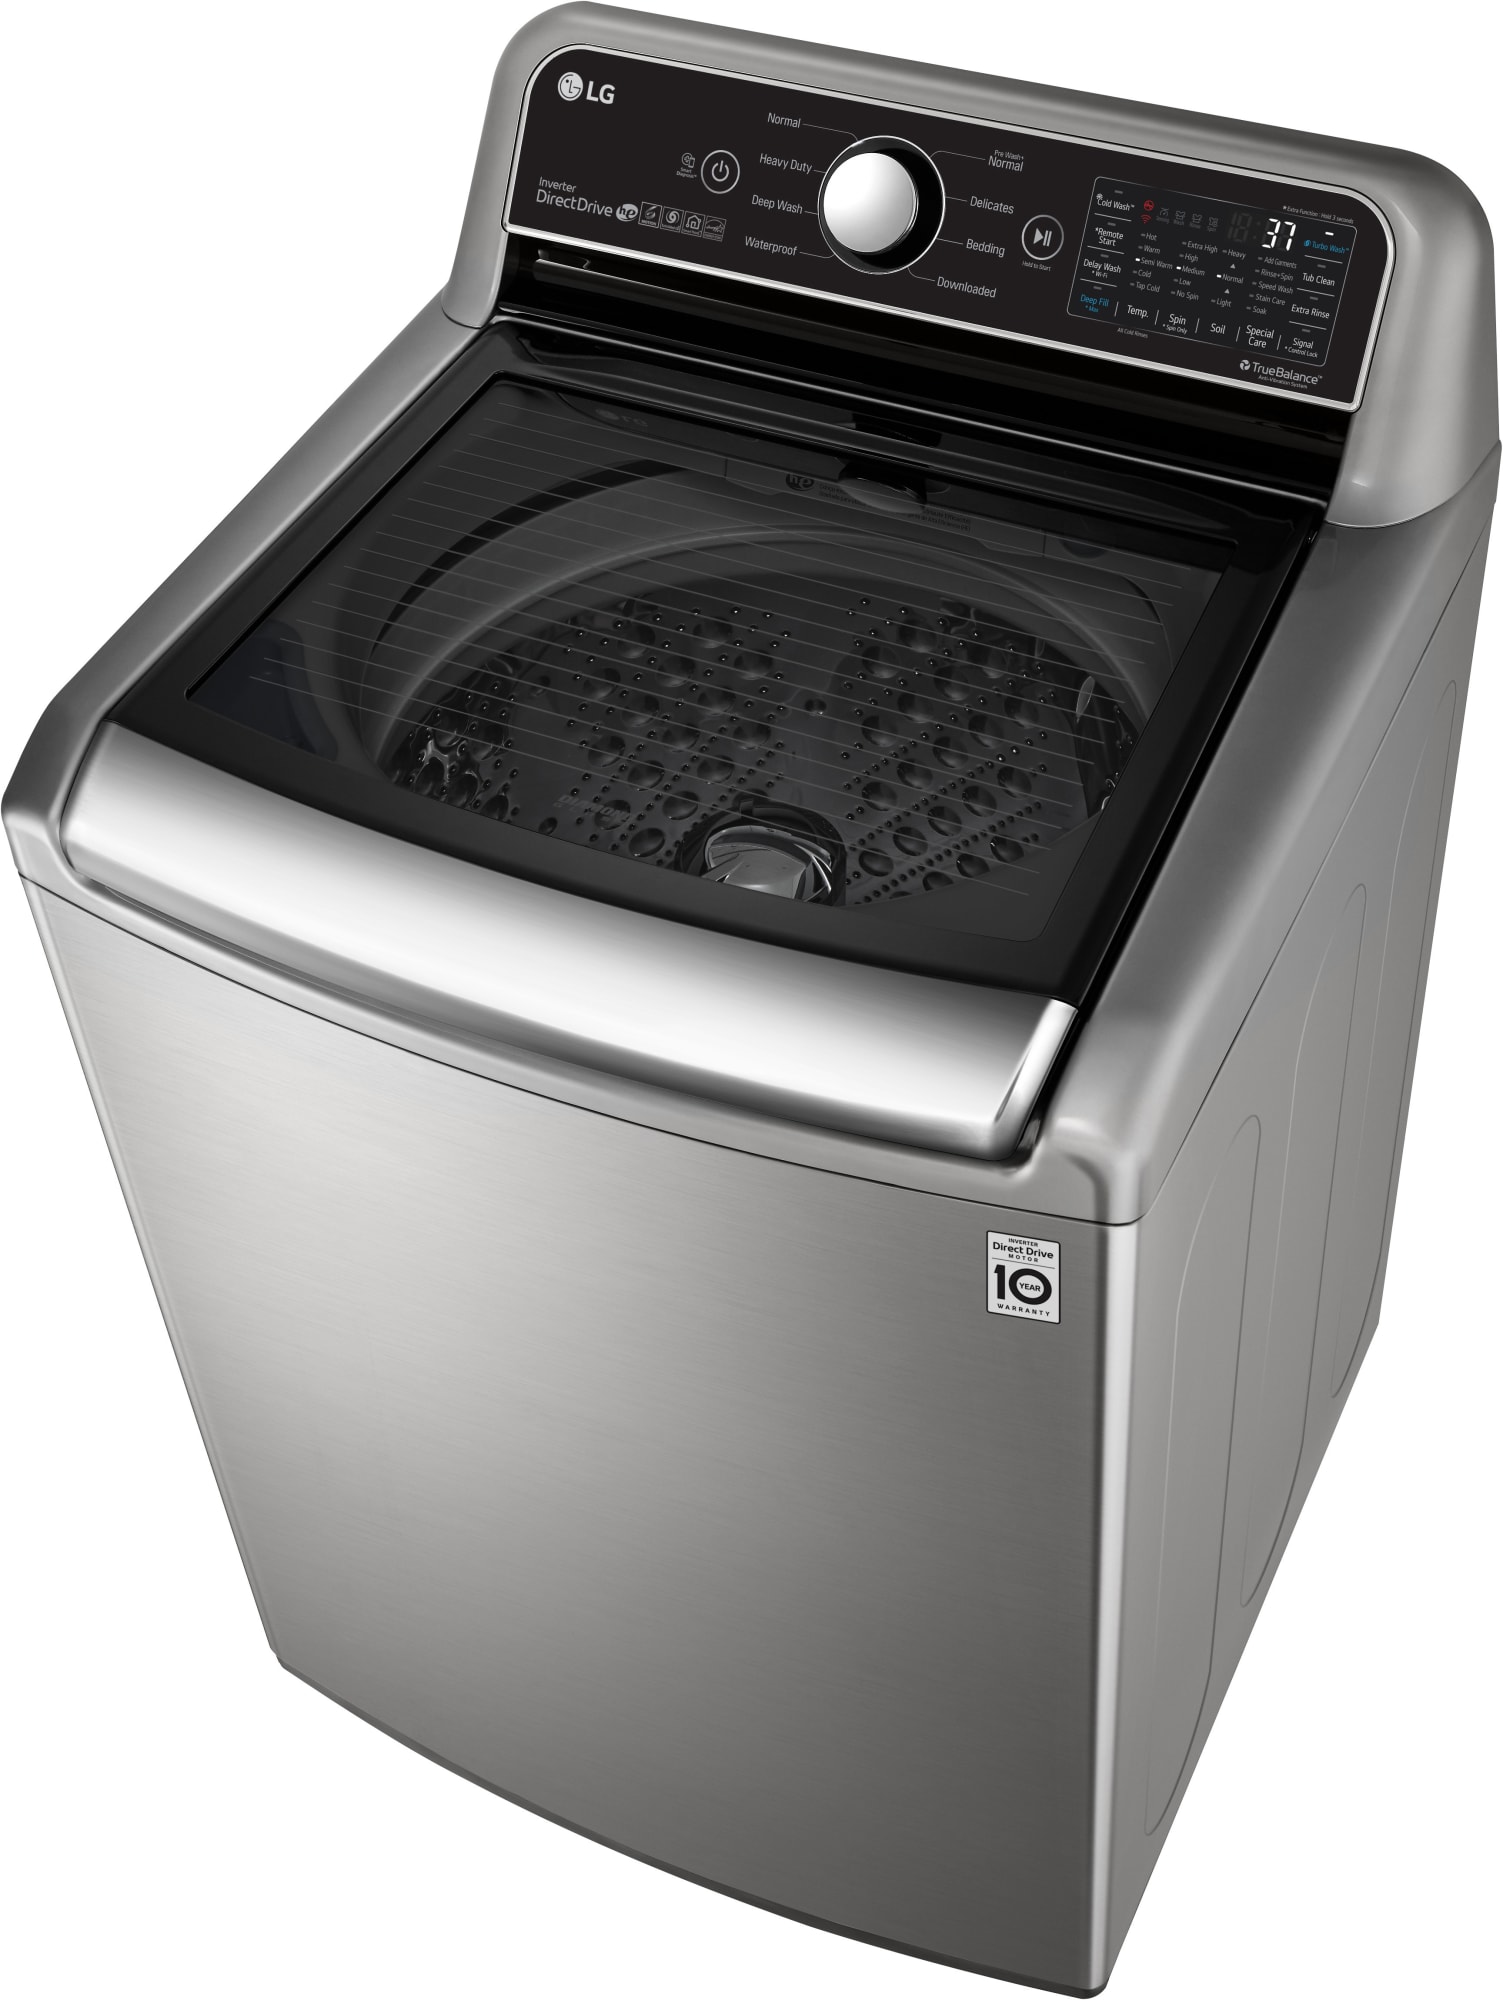 LG WT7305CV 27 Inch Top Load Smart Washer with 4.8 Cu. Ft. Capacity, 4